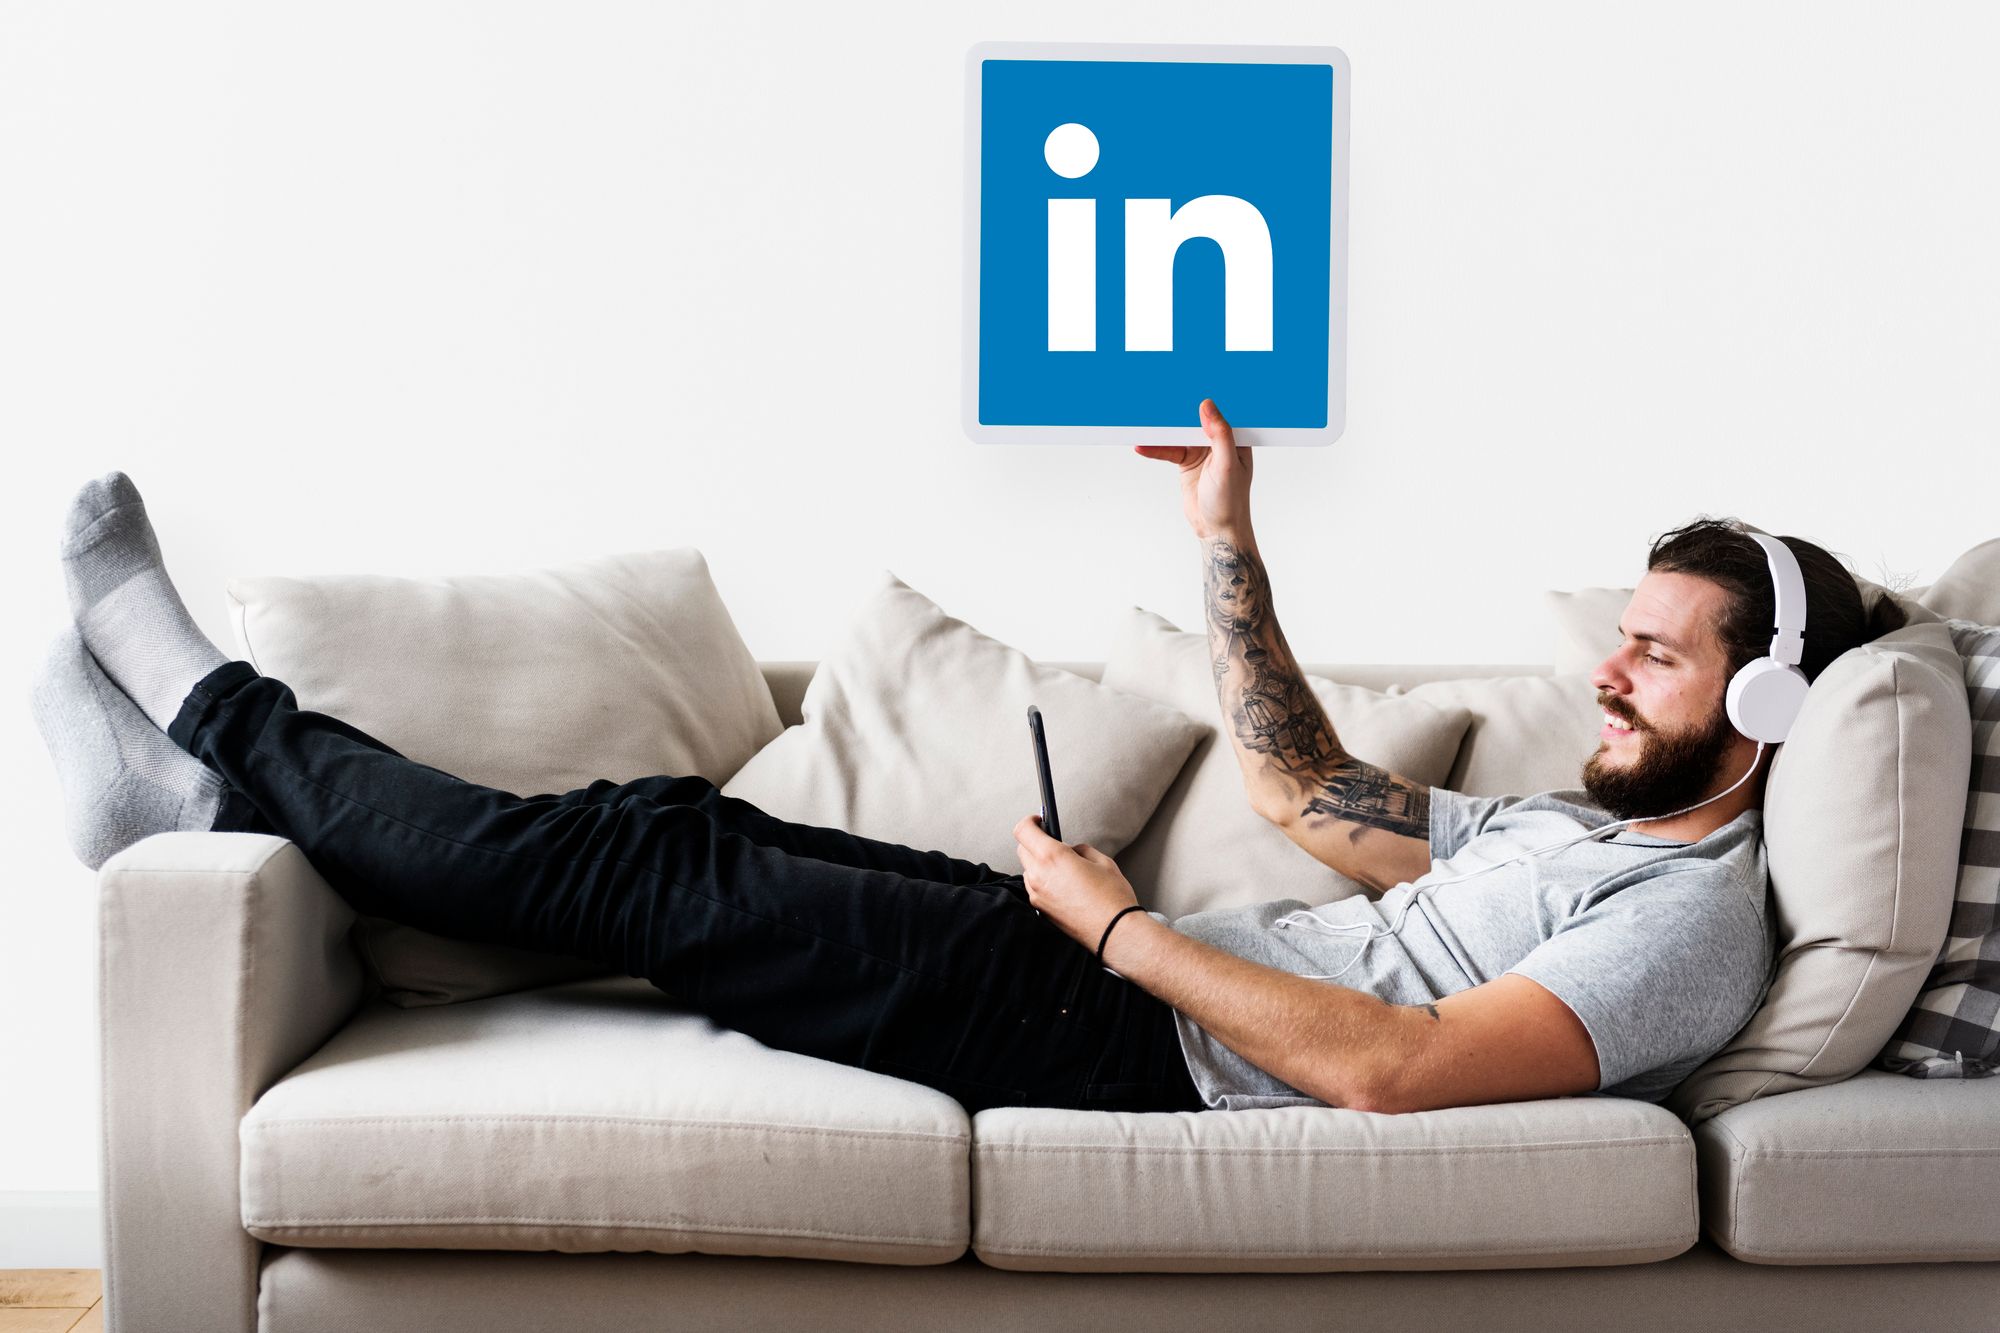 Recruiters: how to find the best candidates on LinkedIn